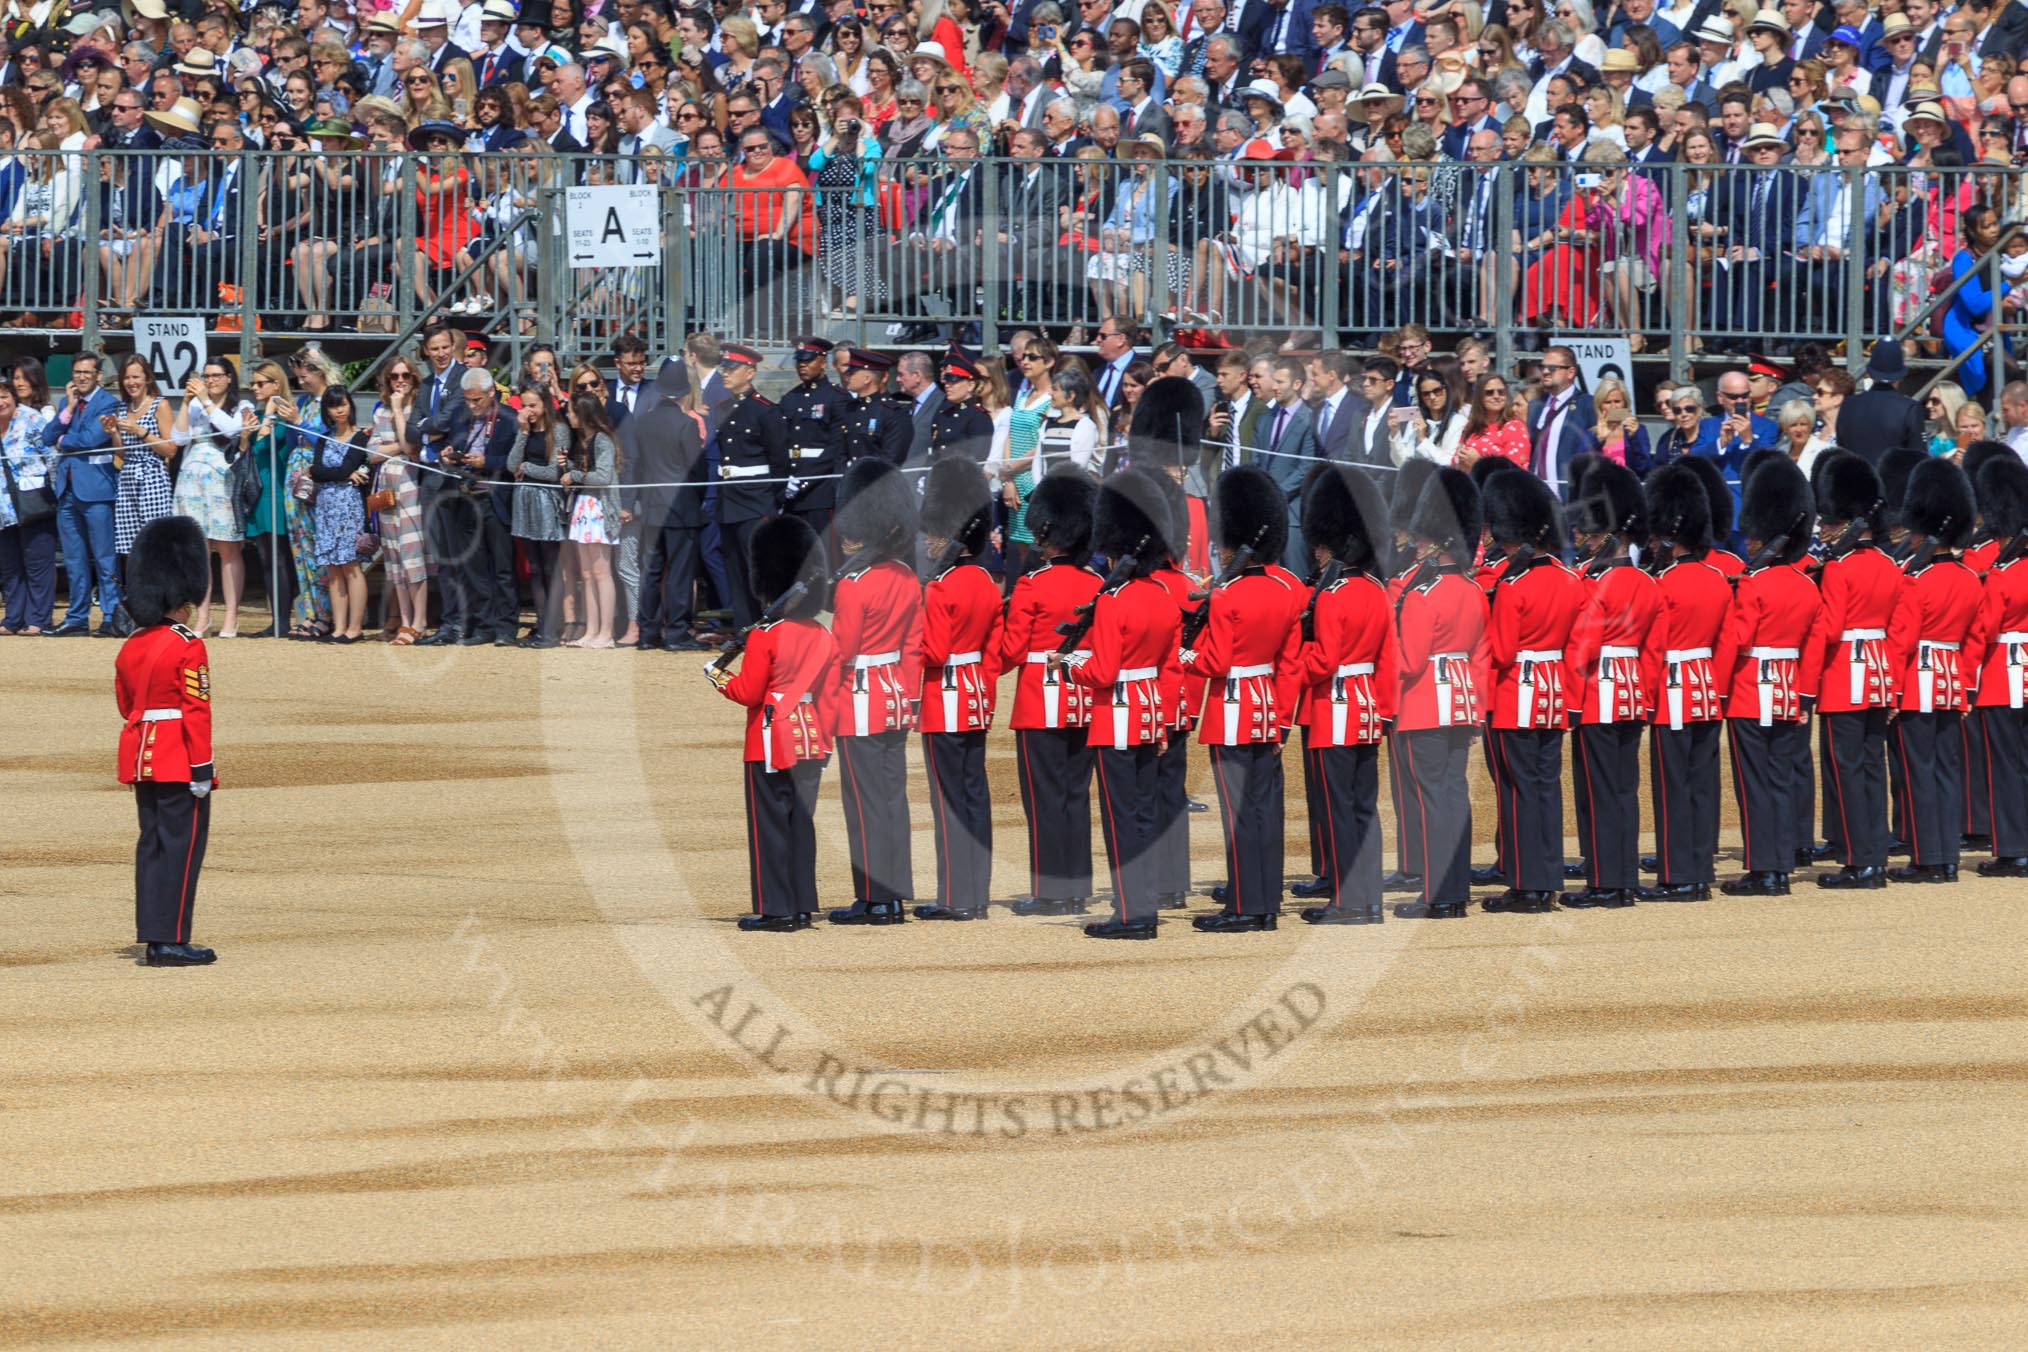 Number Six Guard, F Company, Scots Guards at their initial position on Horse Guards Parade, with Warrant Officer Class 2 (CSM) Nigel Heron, (33), on the left, during Trooping the Colour 2018, The Queen's Birthday Parade at Horse Guards Parade, Westminster, London, 9 June 2018, 10:26.